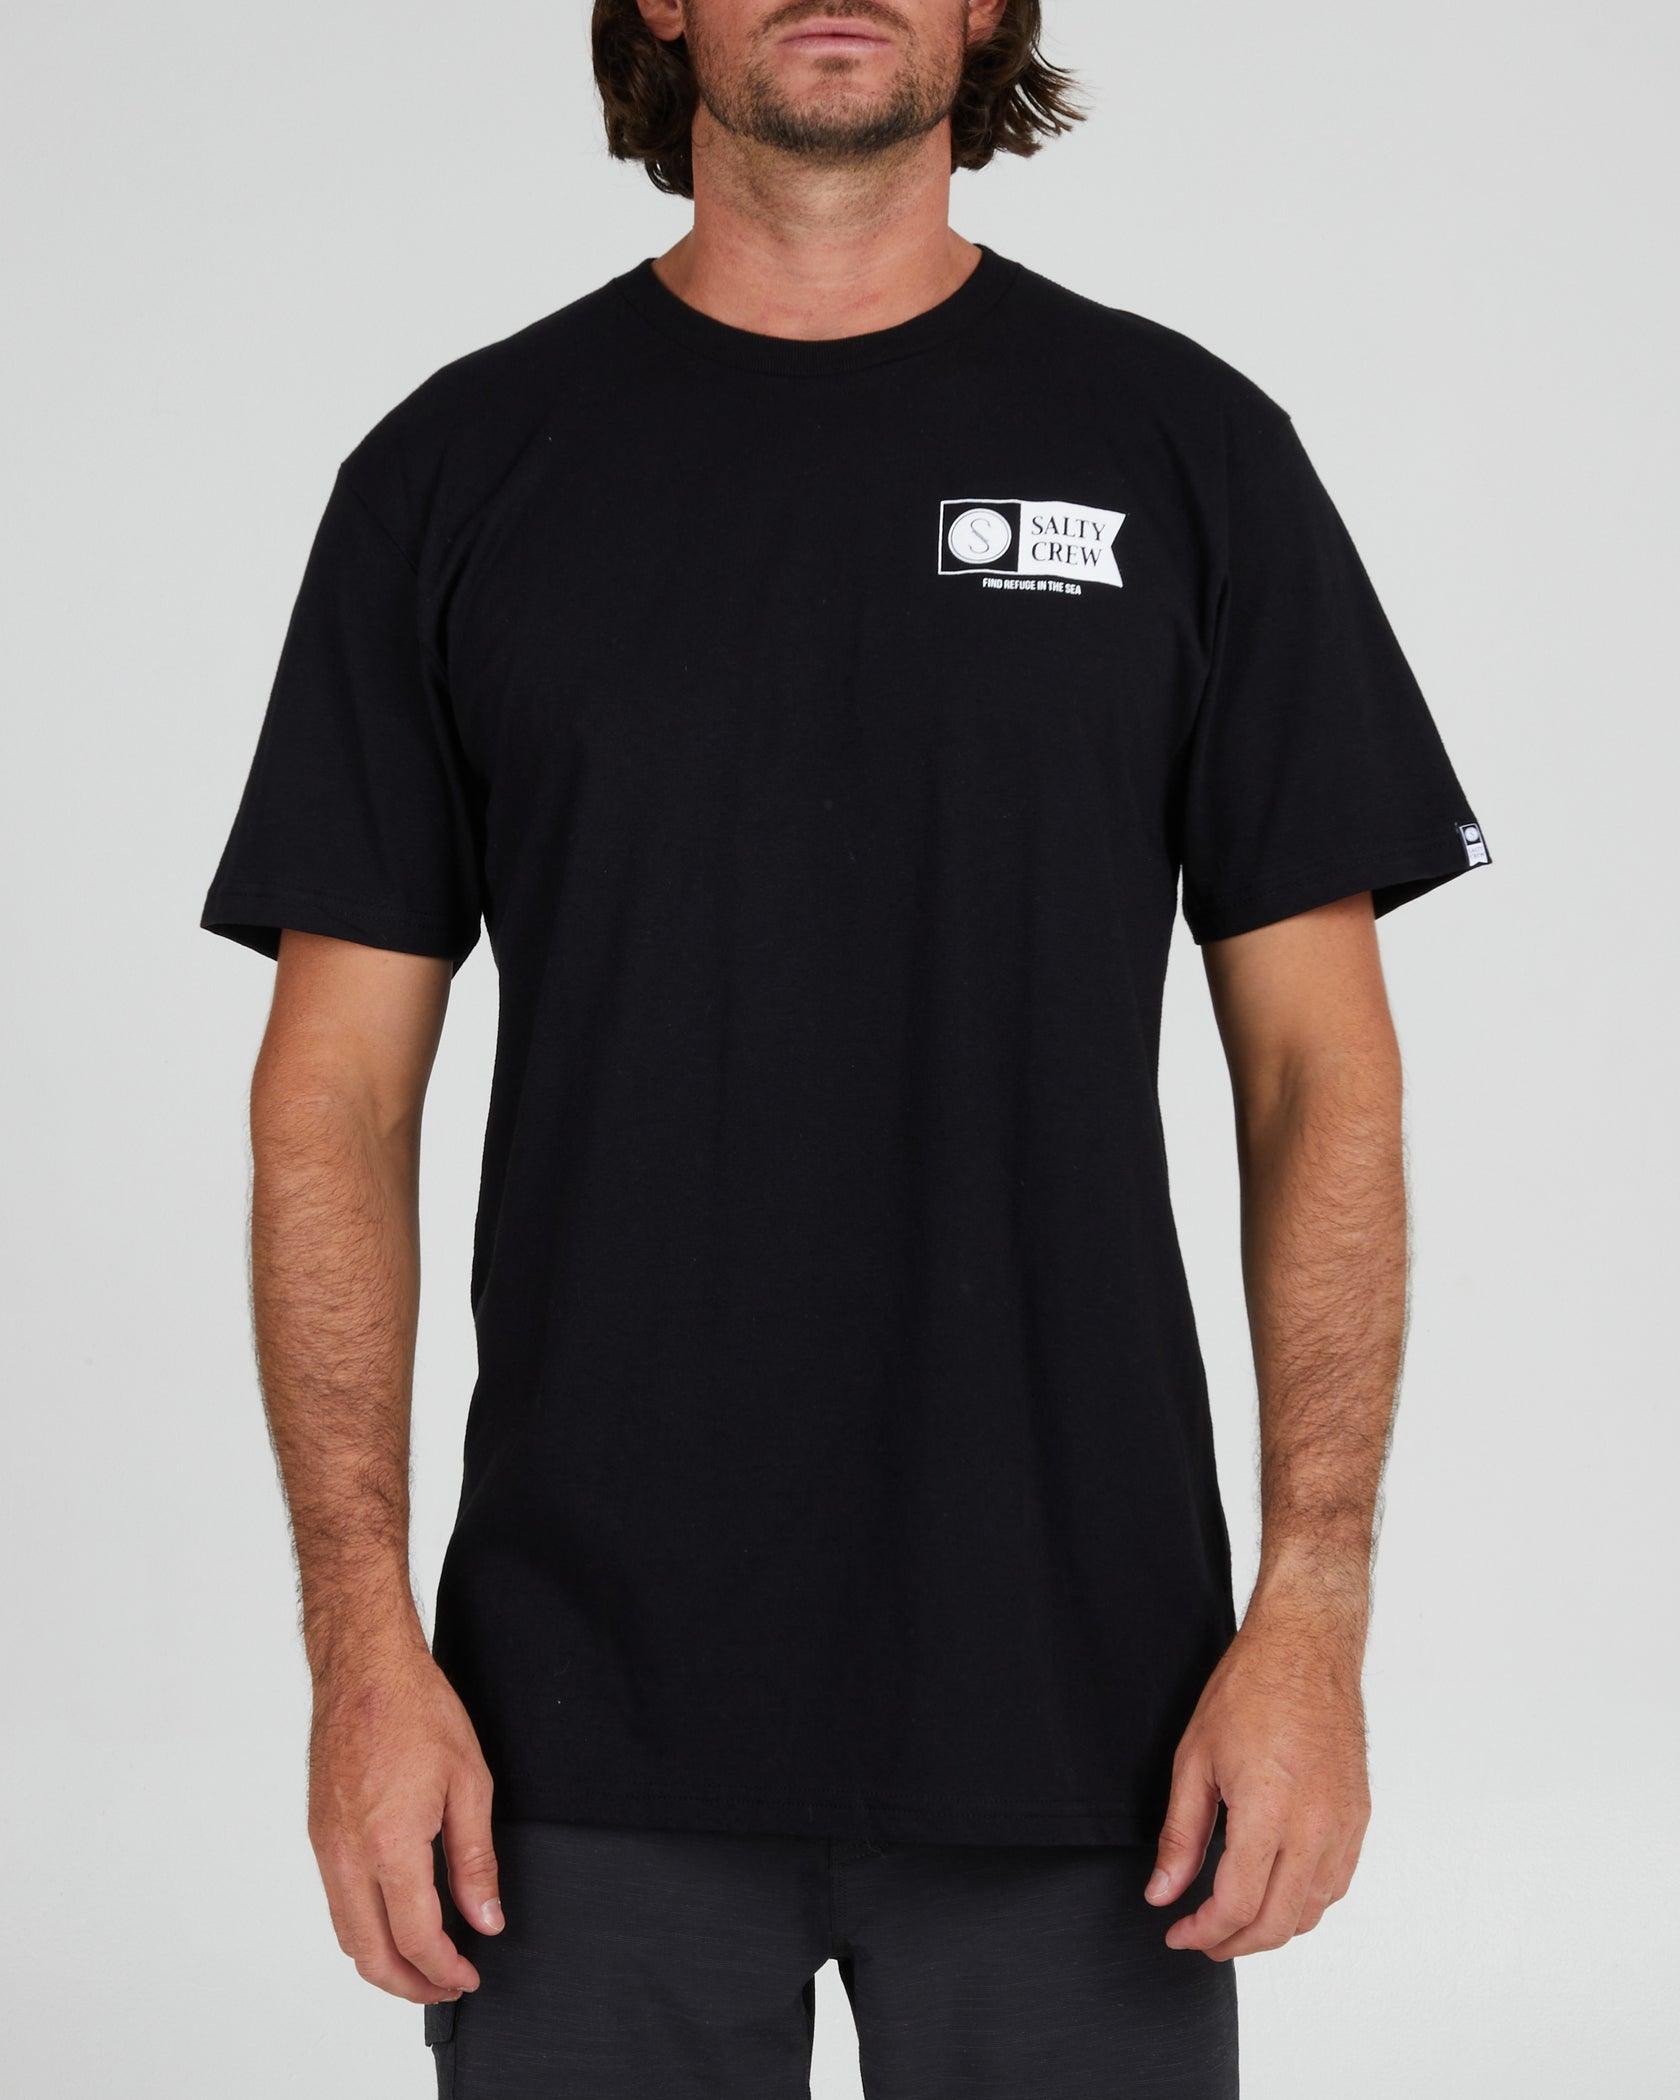 Alpha Black S/S Standard Tee - Purpose-Built / Home of the Trades